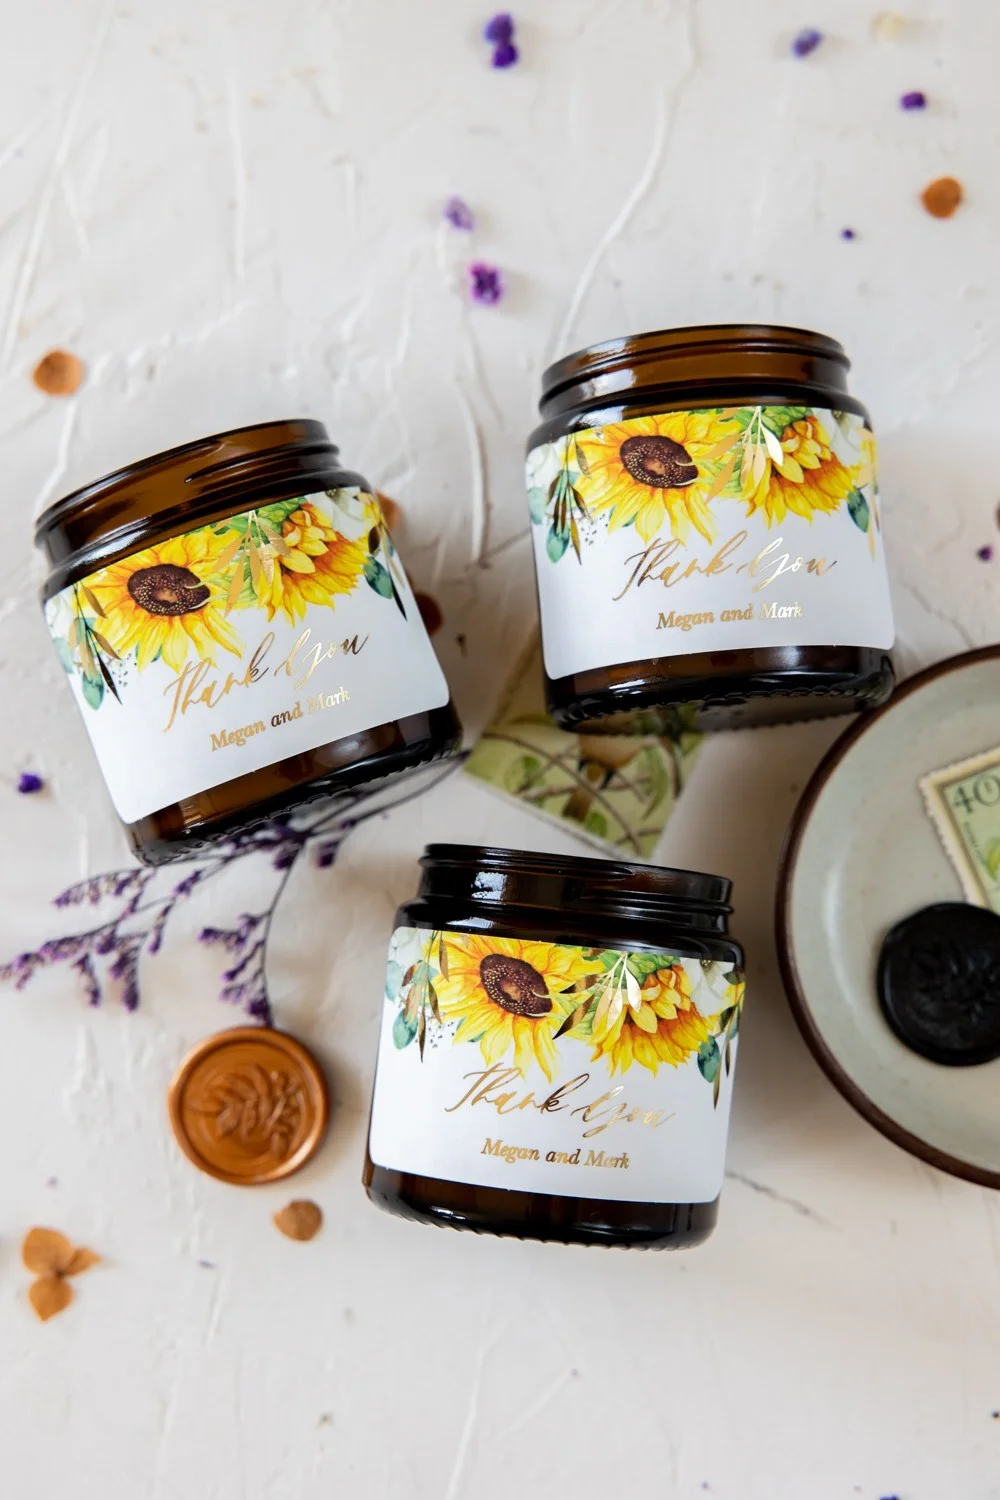 Wedding Favors for Guests in bulk | Sunflower Wedding Favors | Glass Jar Candle | Bridal Shower Favors | Soy Wax Candles